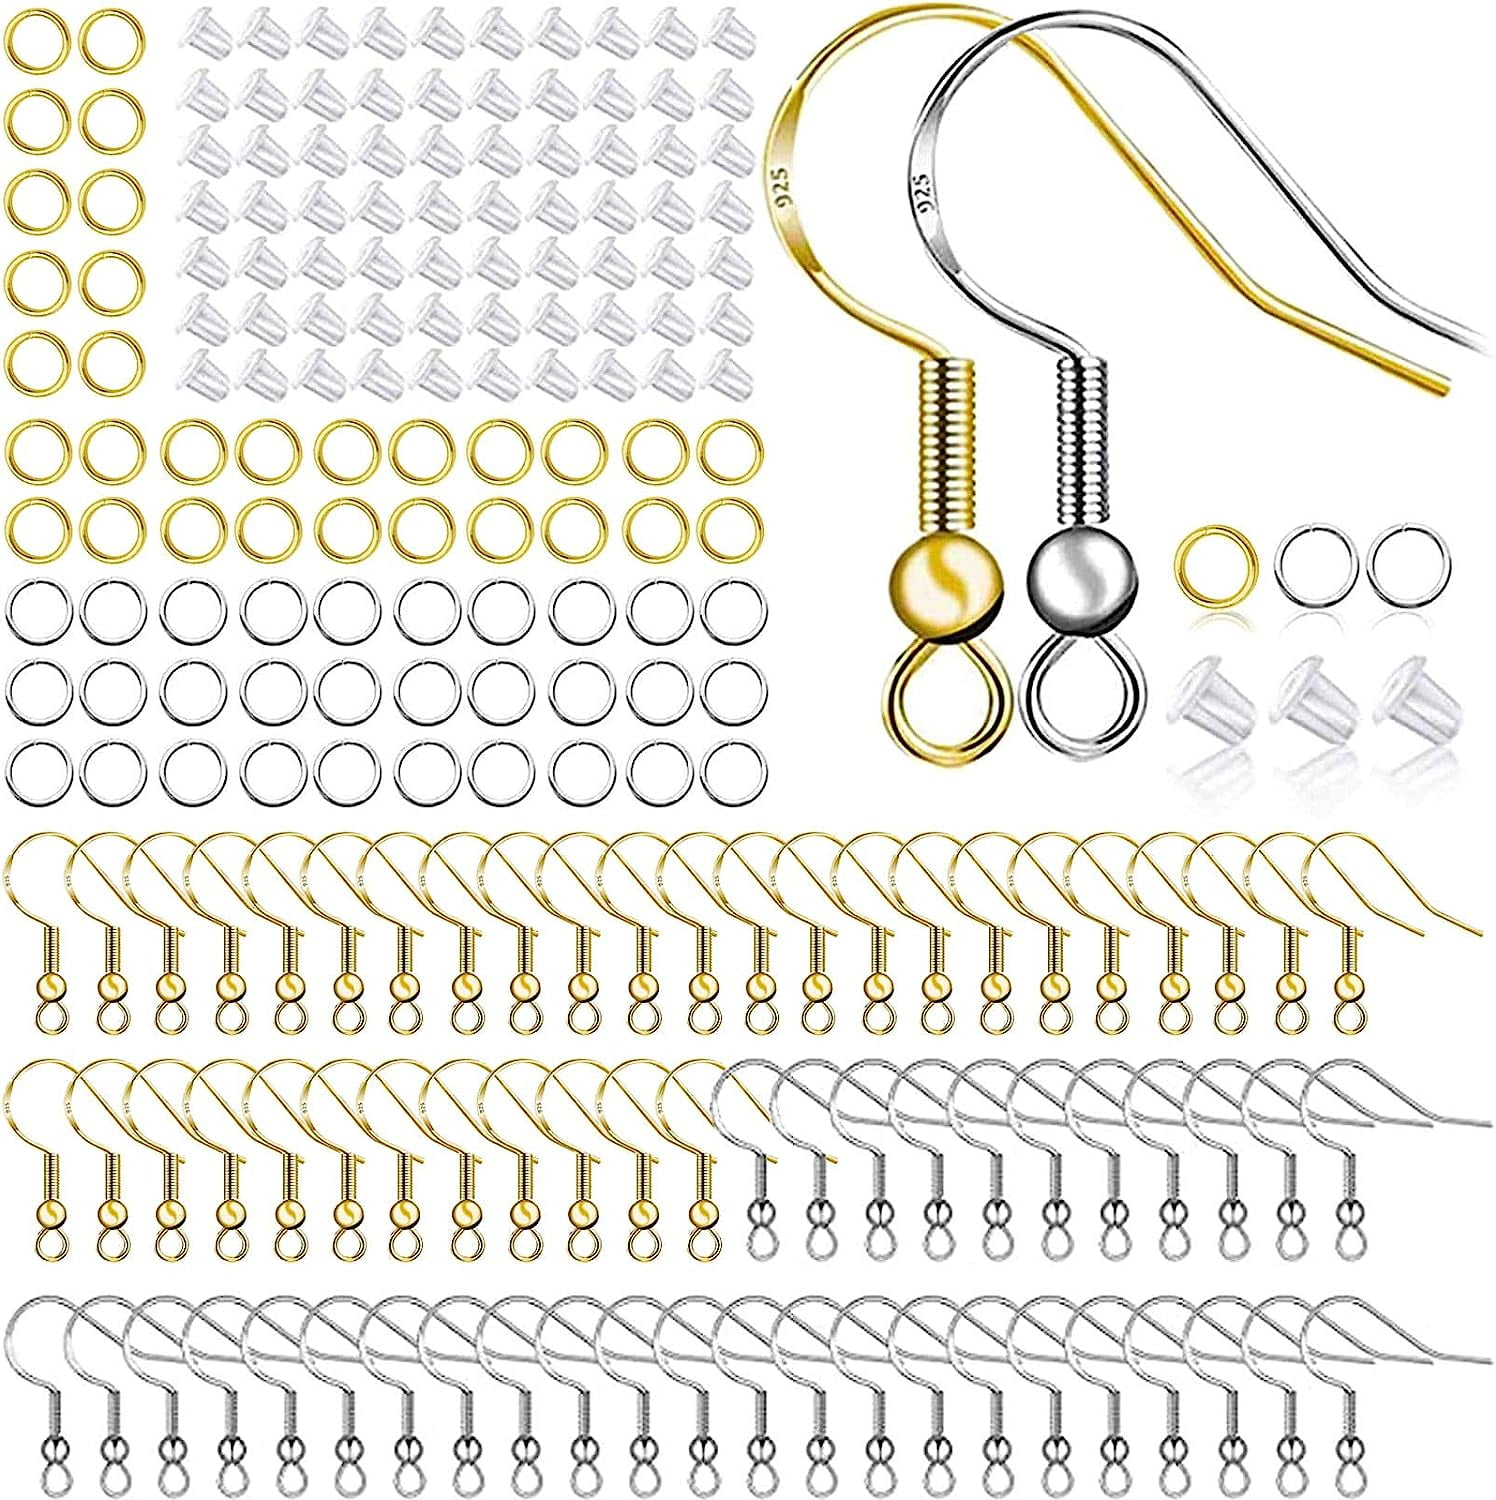 TOAOB 150pcs 5 Colors Earring Hooks Kit Hypoallergenic Ear Wires and  1000pcs Jump Rings 200pcs Earring Backs for Earrings Making Jewelry Making  Findings 